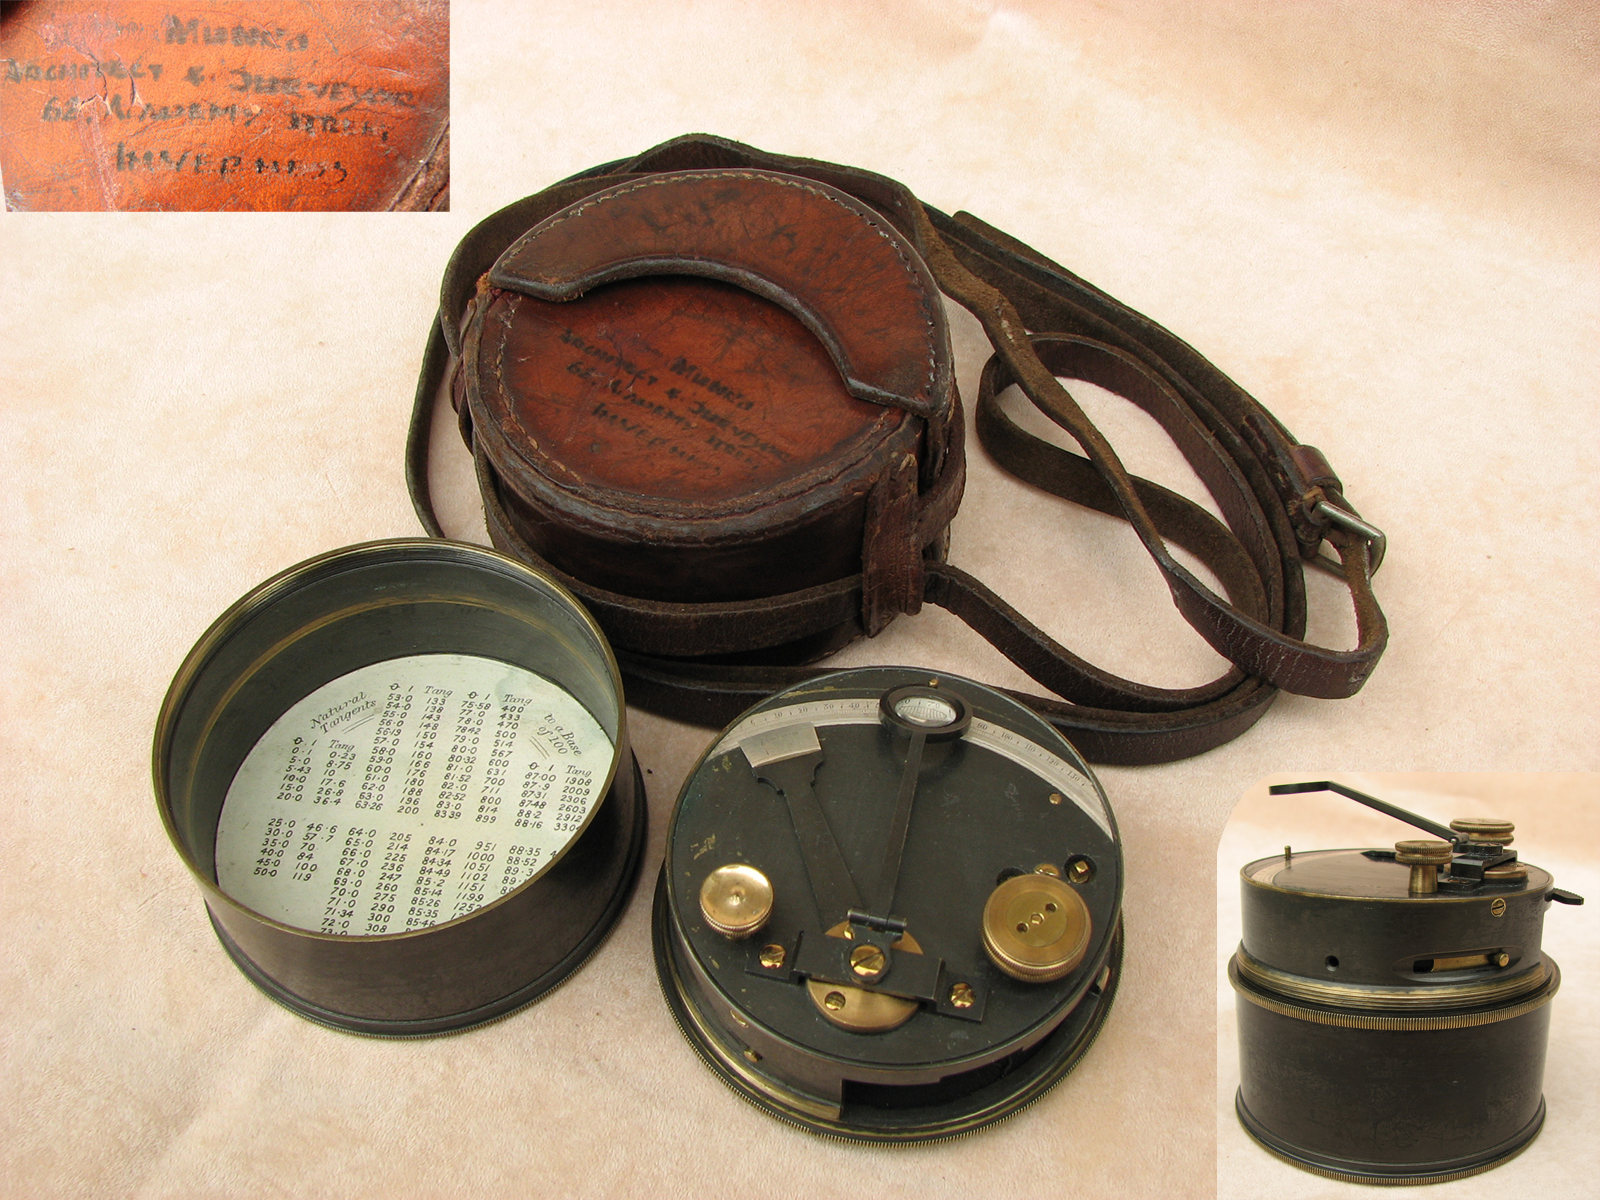 Francis Barker post WW1 era pocket box sextant with leather case